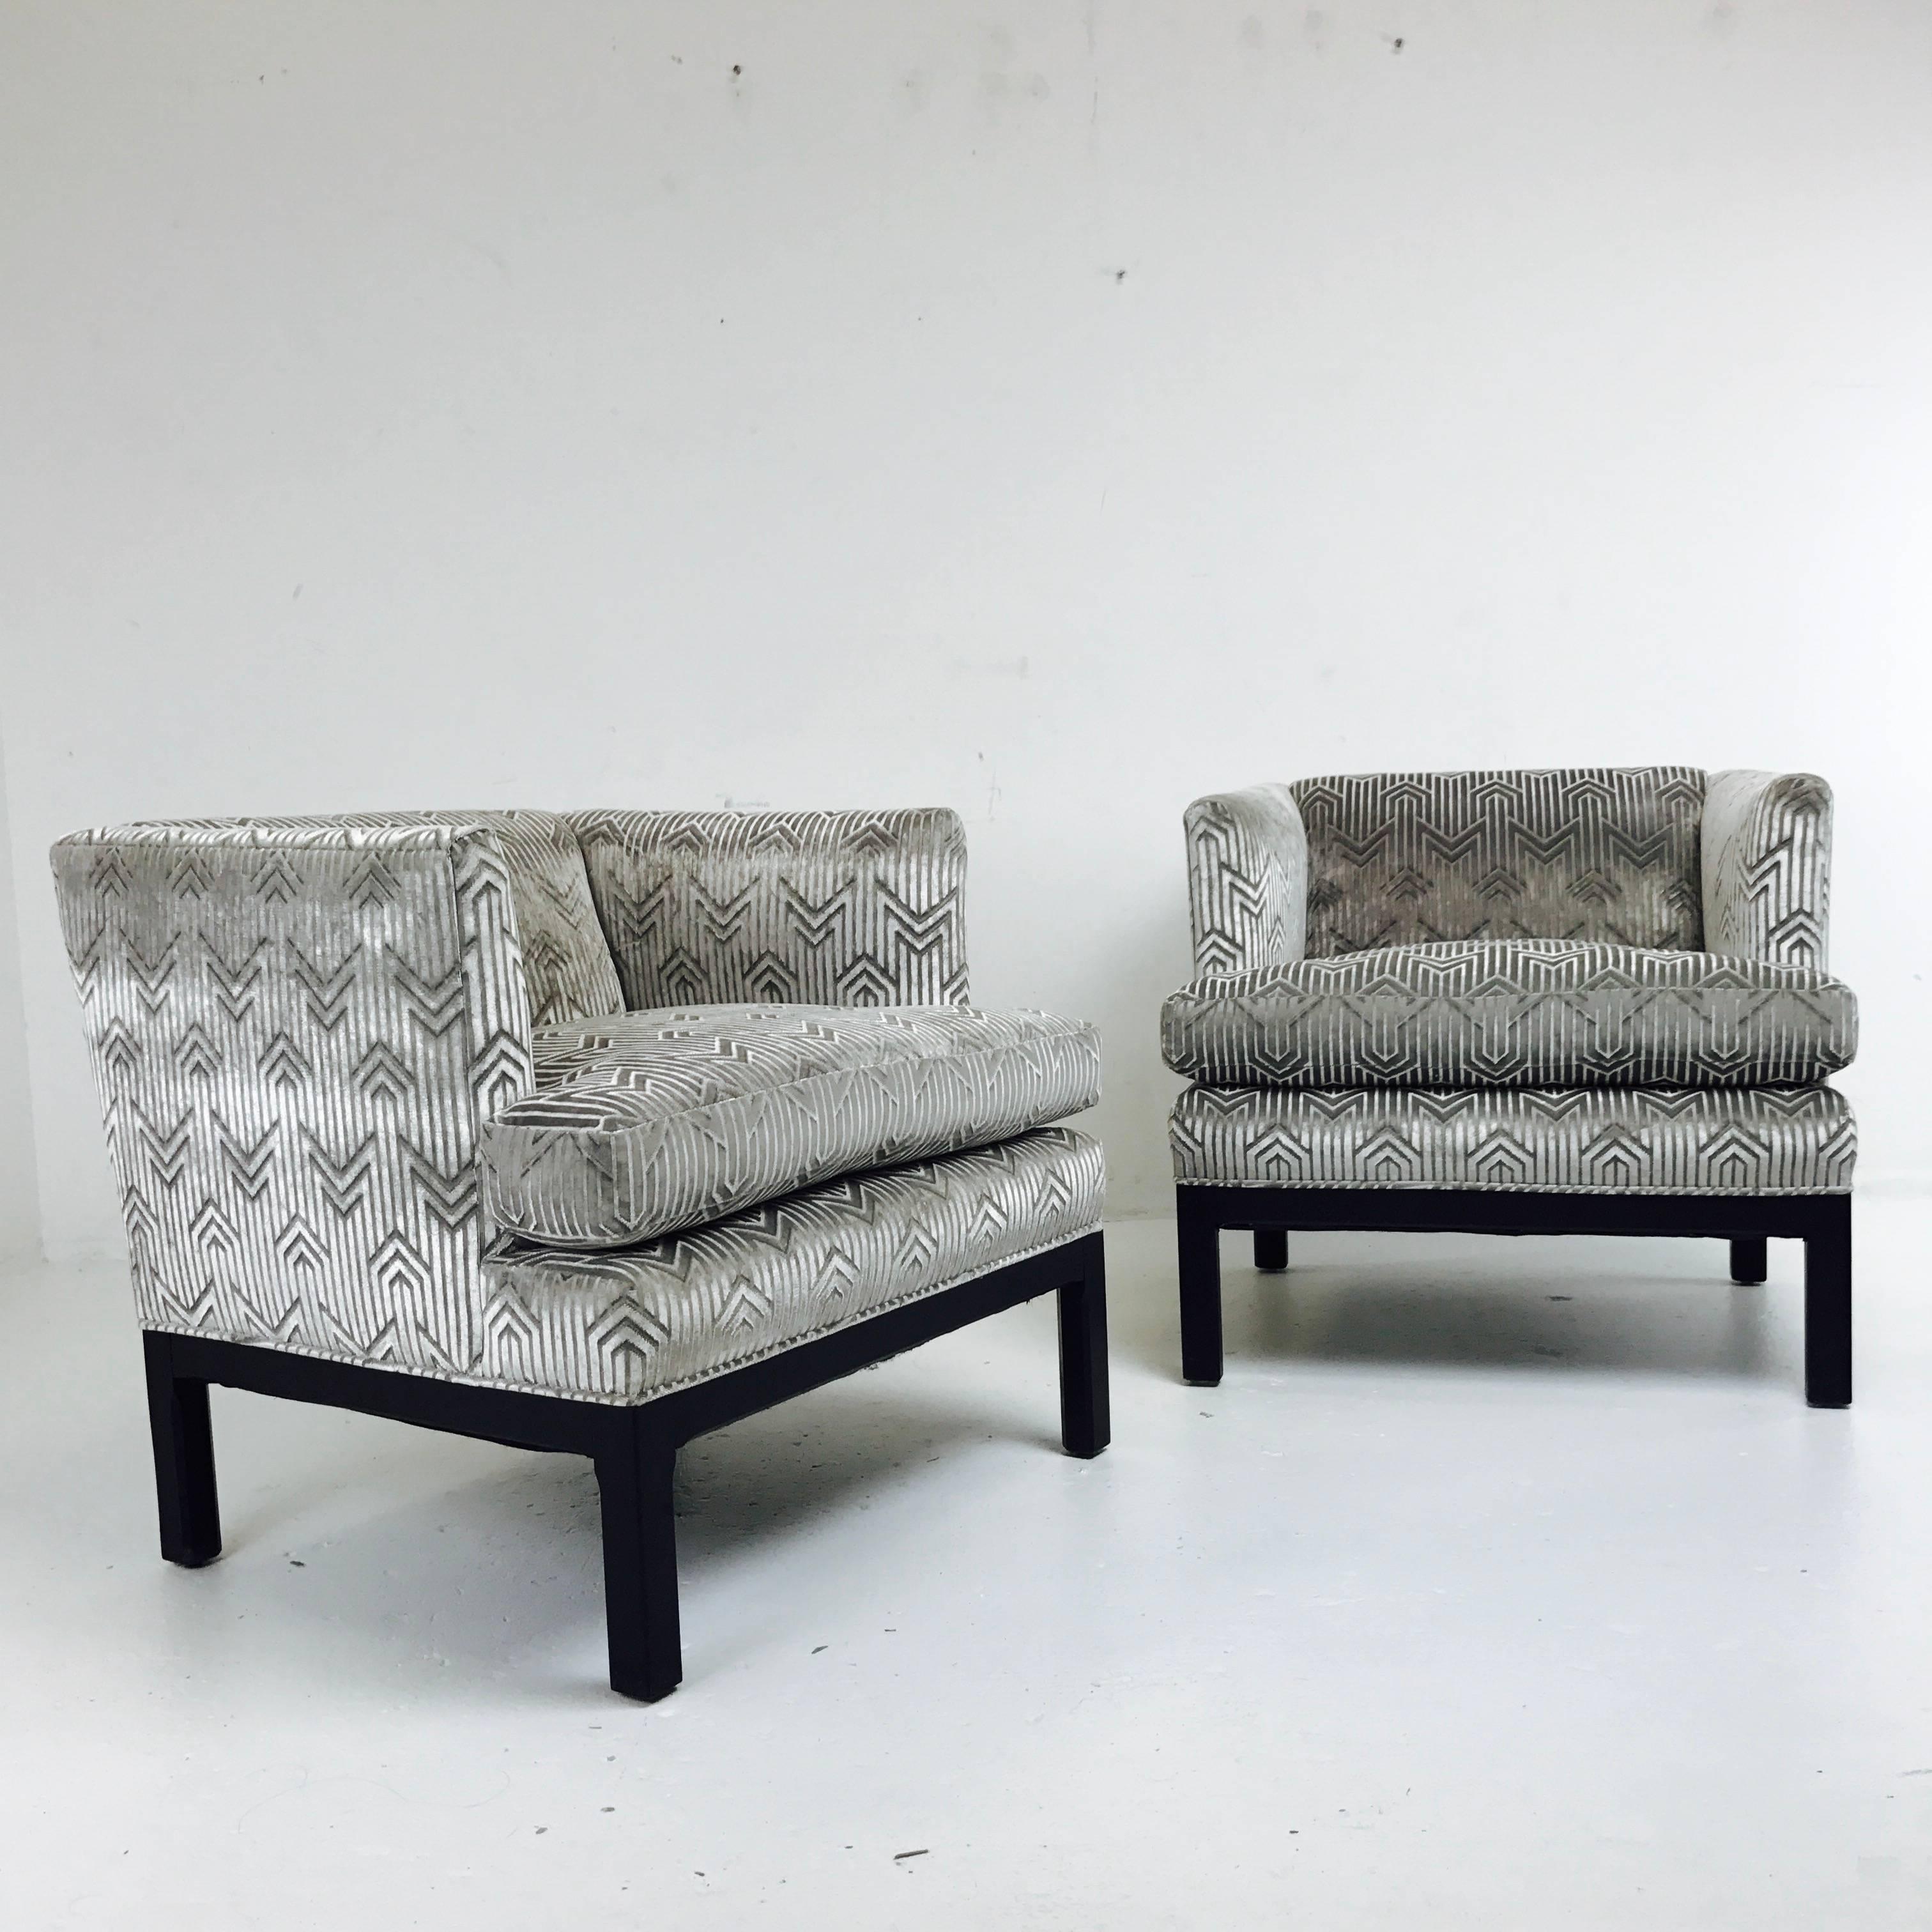 Pair of armchairs by Dunbar. Sturdy frame. Newly upholstered in a luxurious cut velvet, circa 1970s.

Dimensions: 28